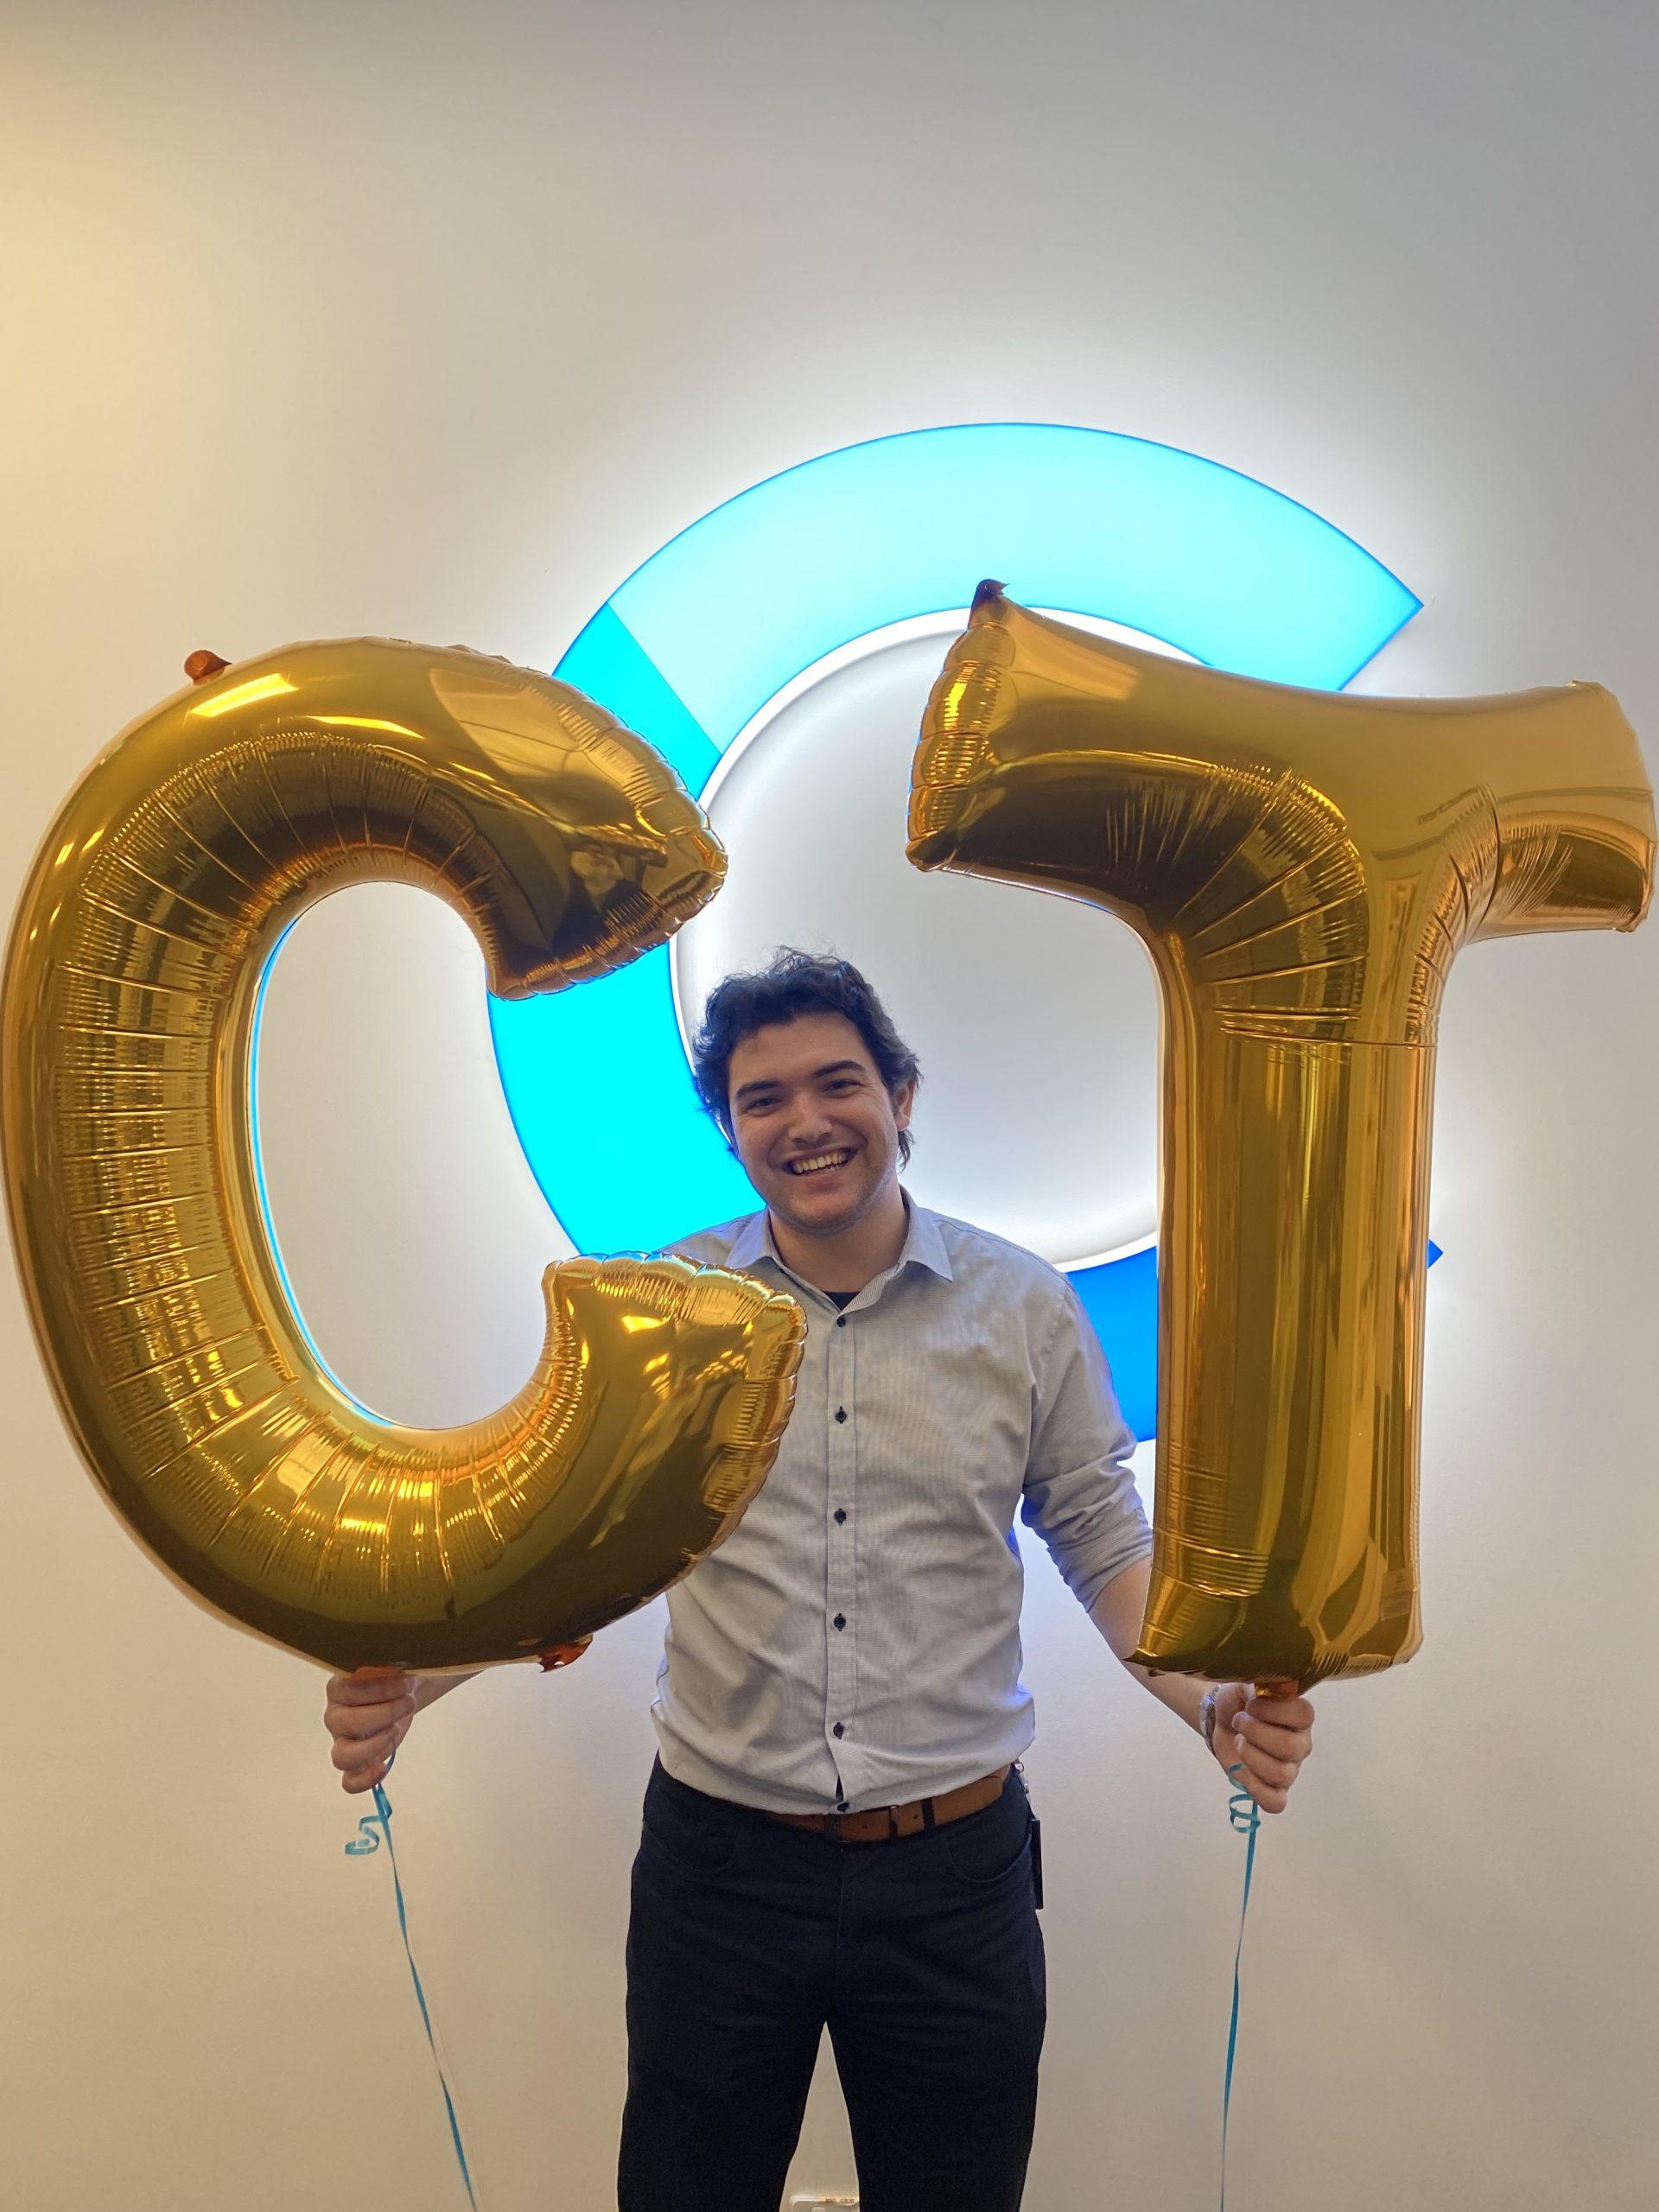 A CT employee holding gold CT baloons, in front of the CT logo